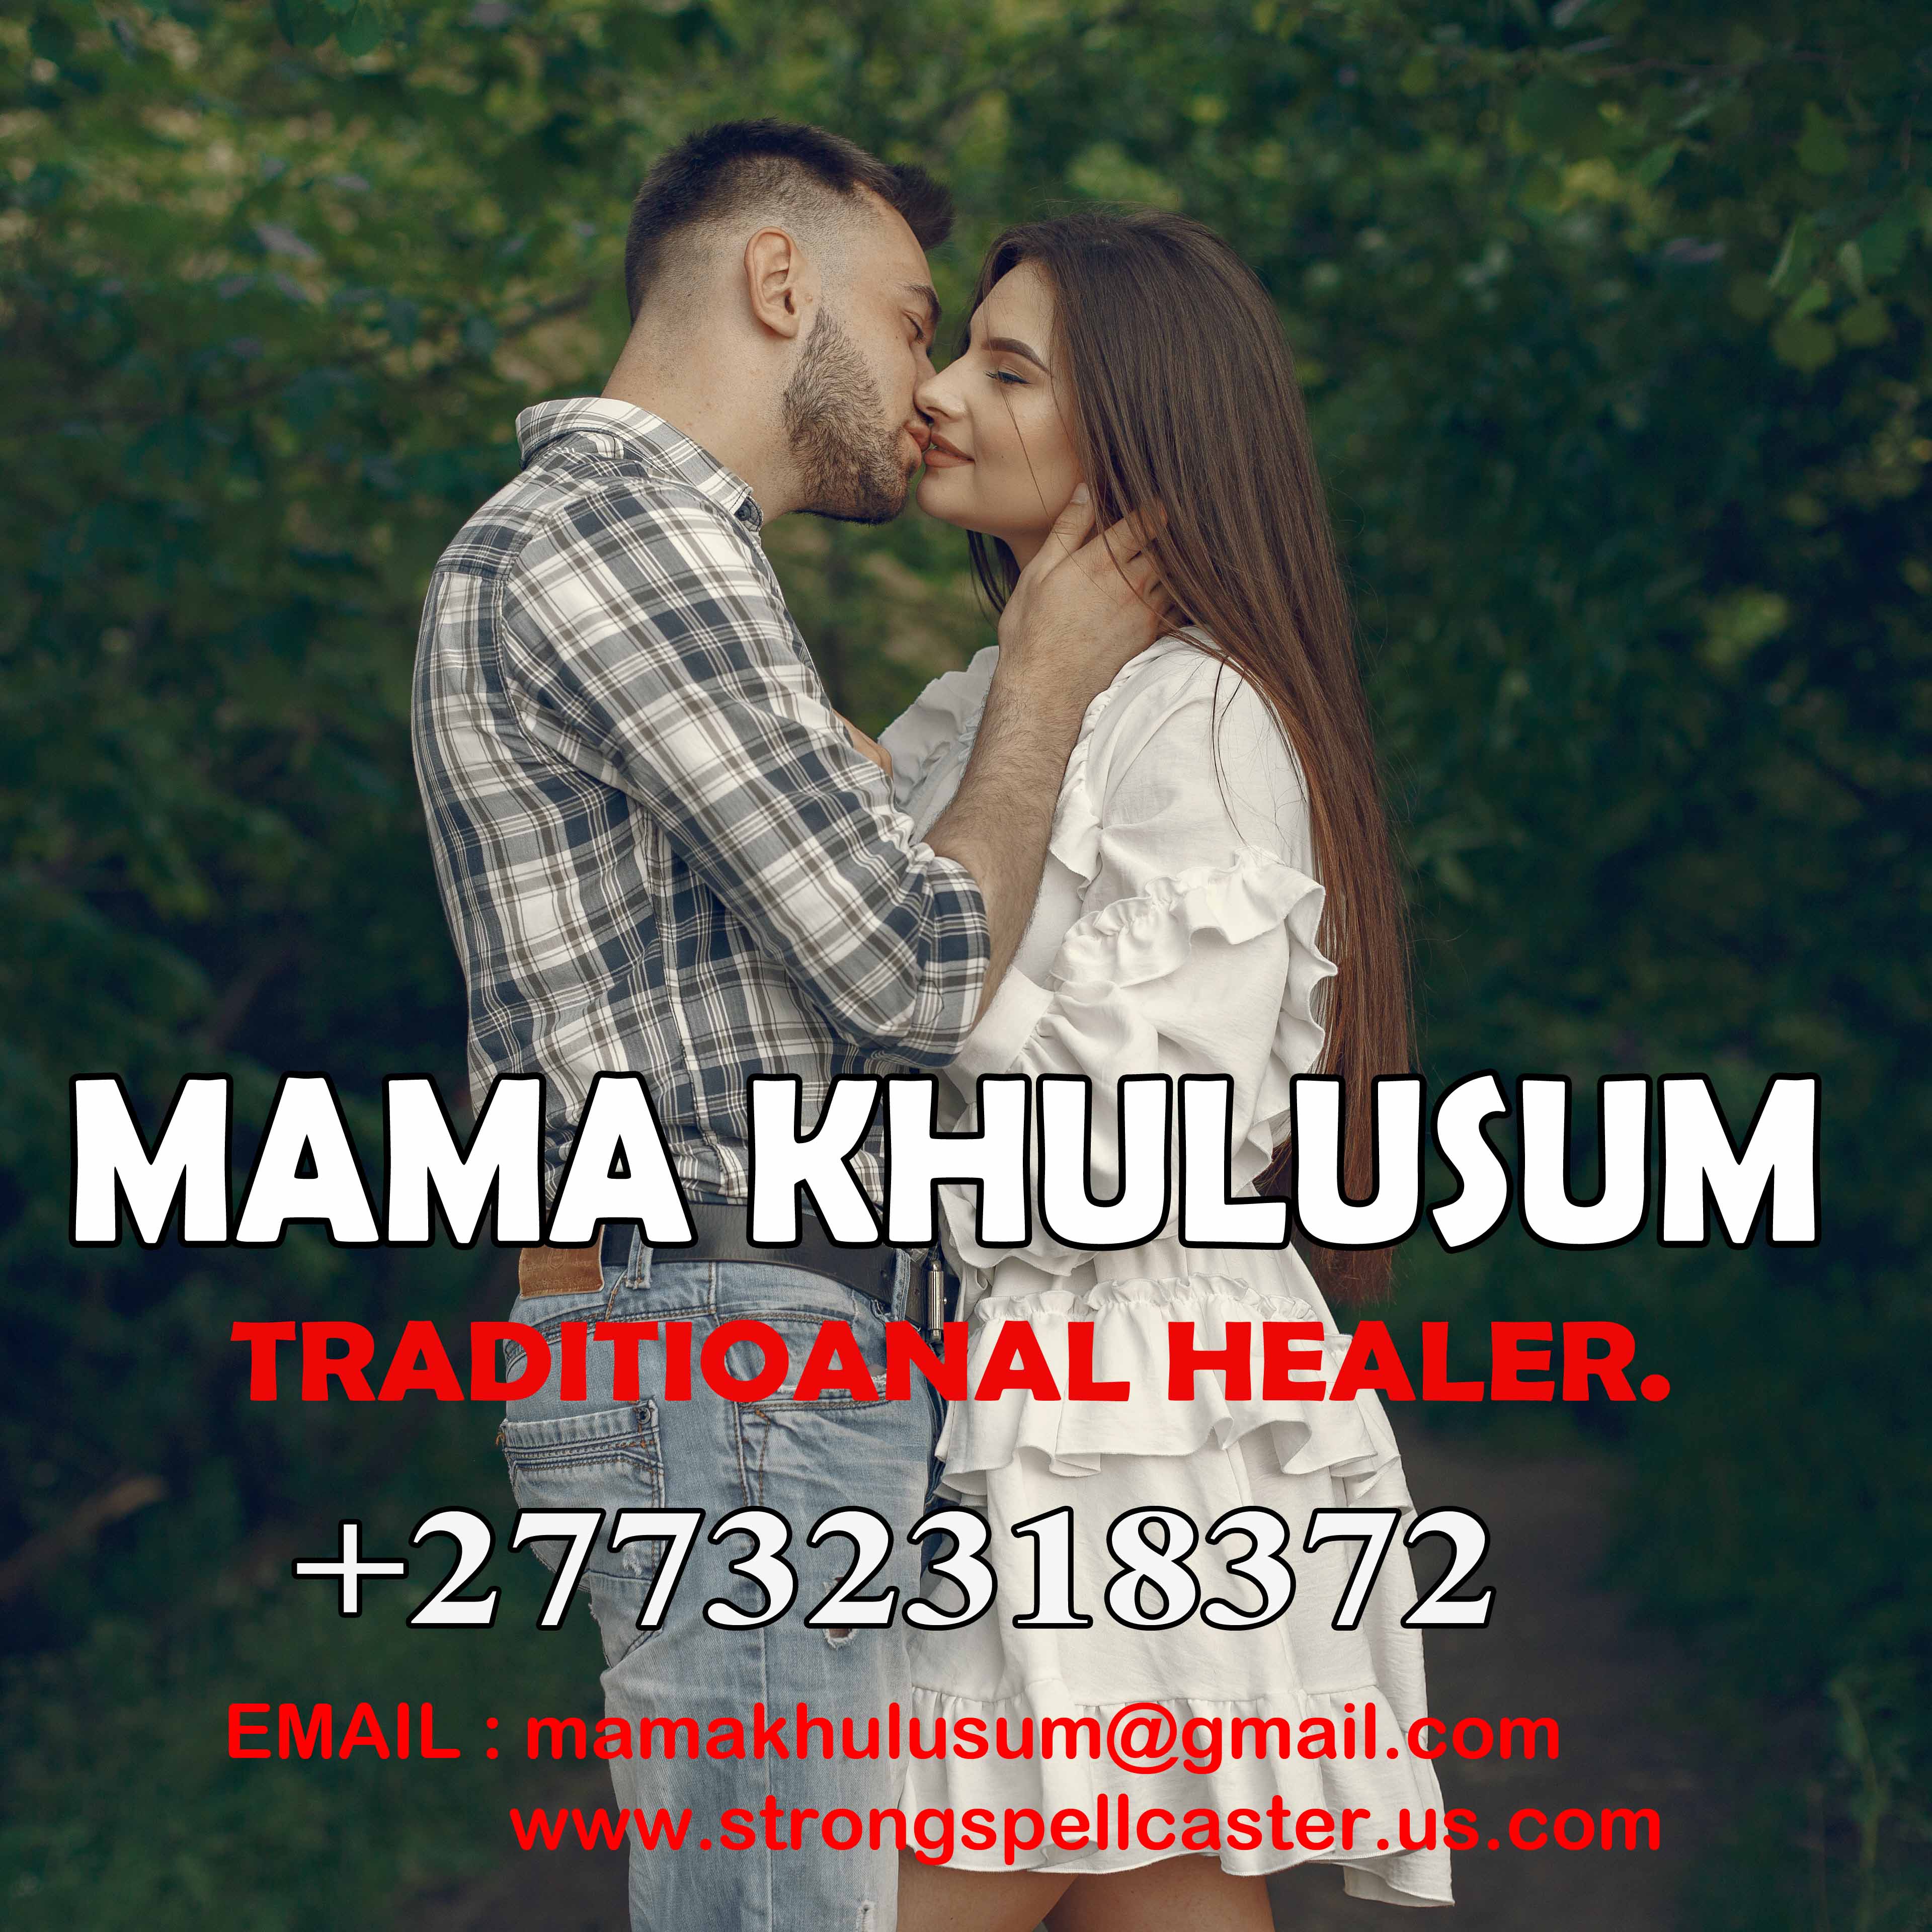 Love Spell Specialist in New York / New Jersey +27732318372. - photo